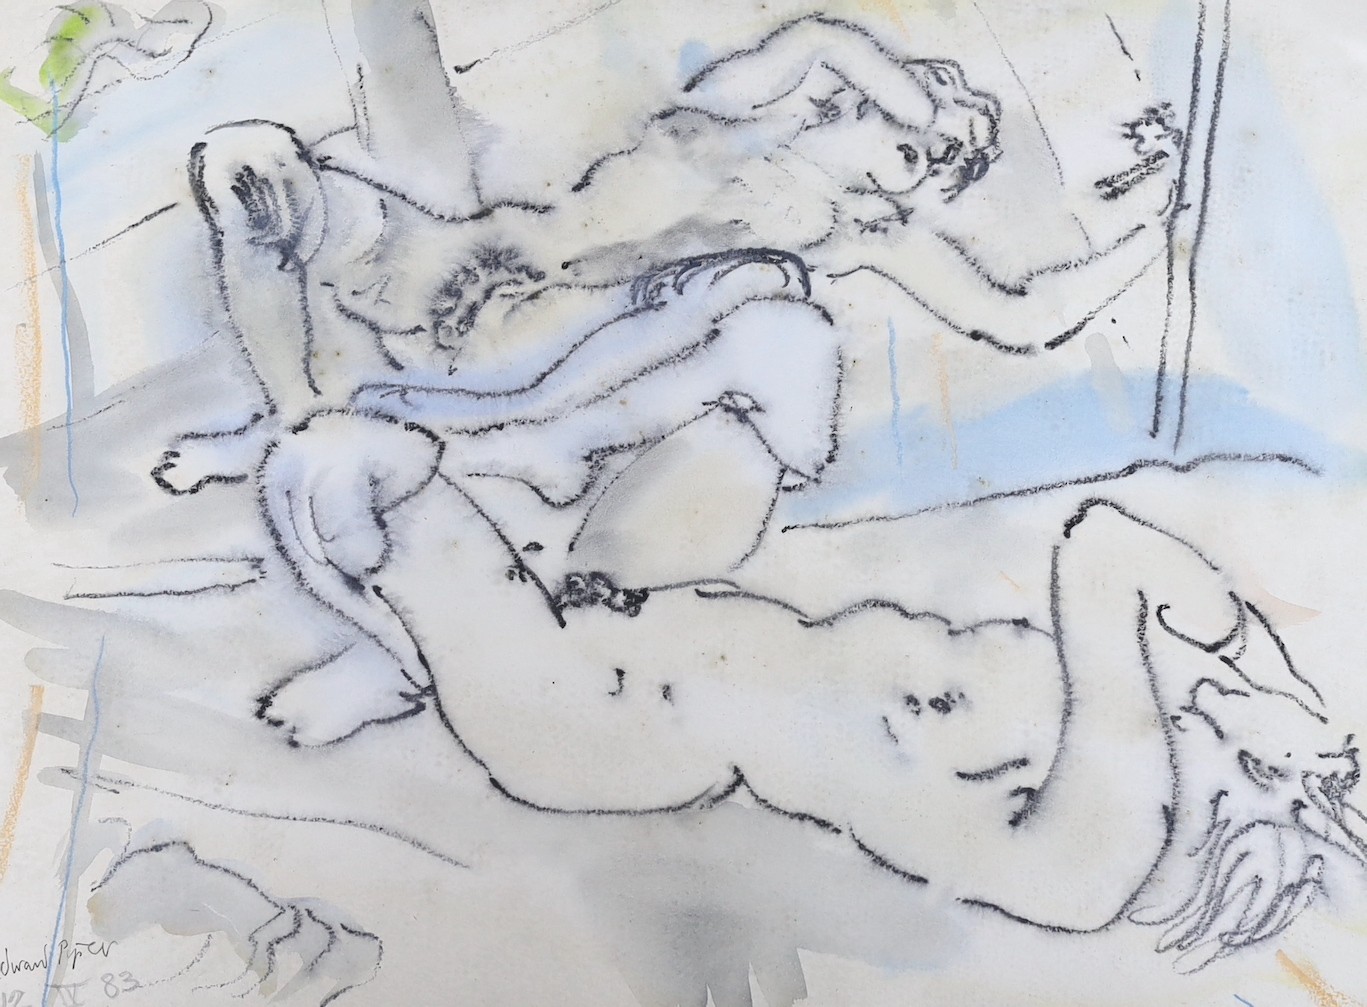 Edward Piper, charcoal and pastel on paper, a study of a recumbent figure gazing in their mirror reflection, signed